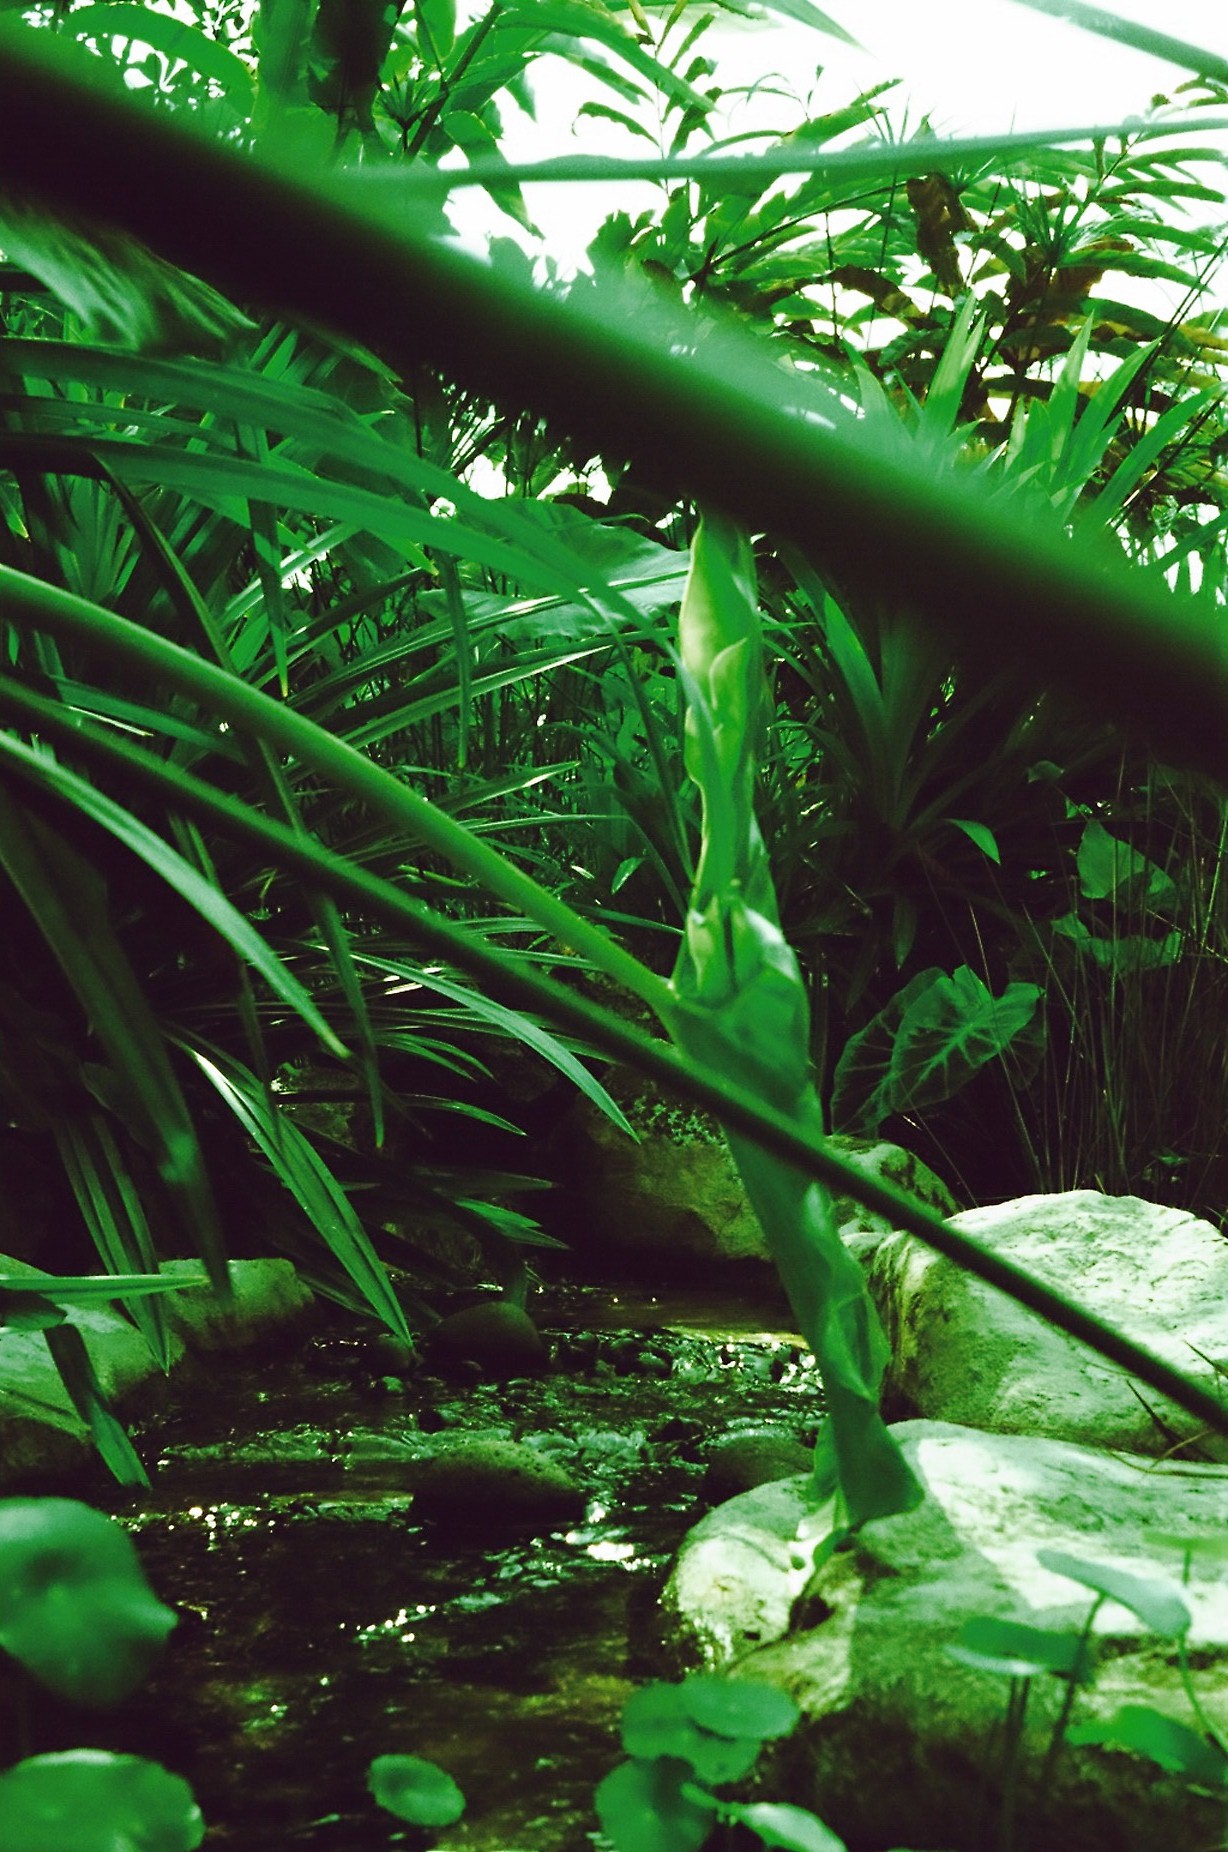 plants and rocks in the water in a tropical environment